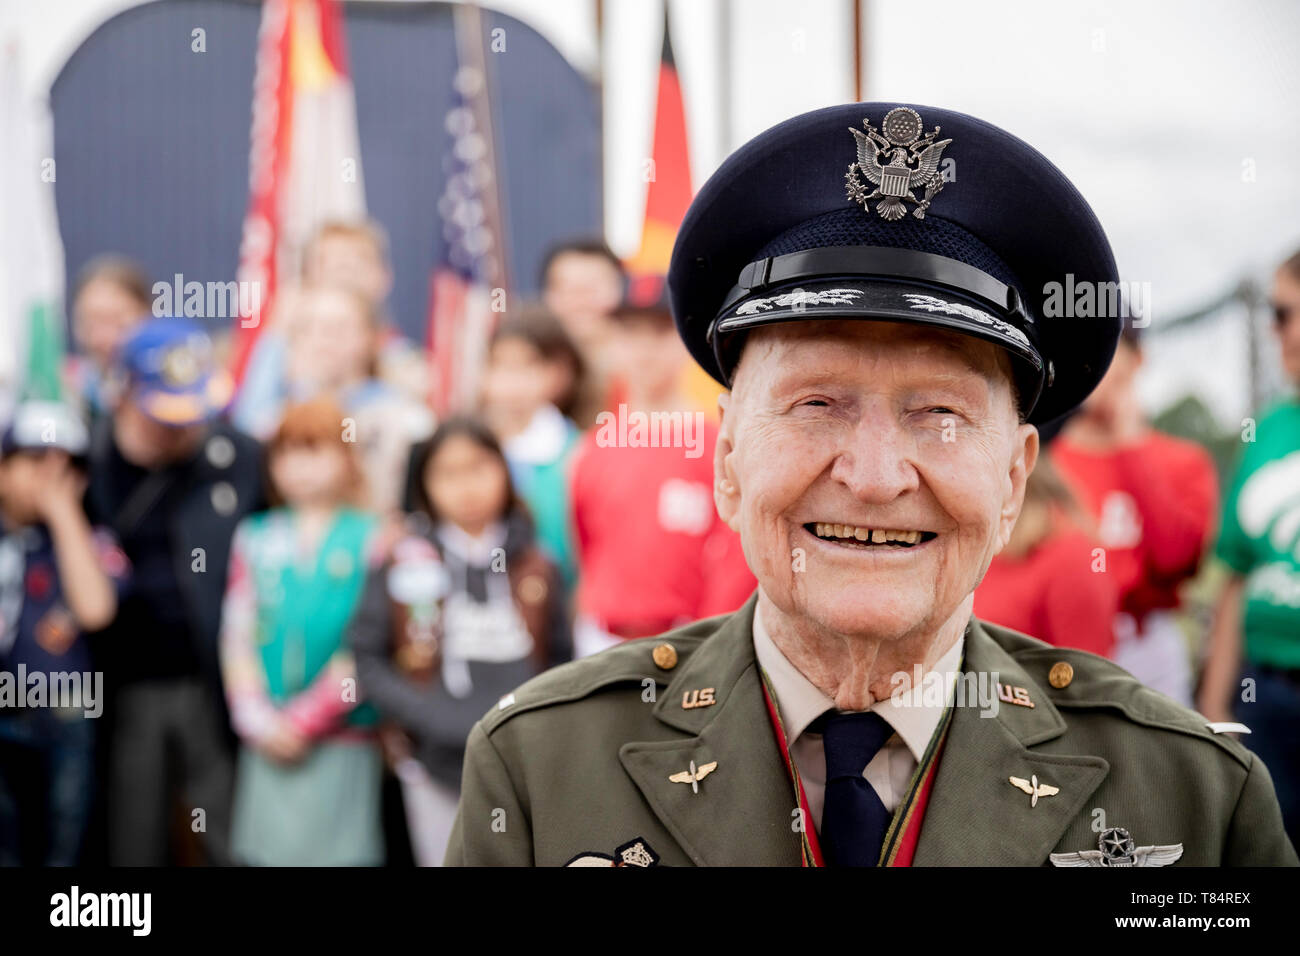 Berlin, Germany. 11th May, 2019. Gail Halvorsen, former airlift pilot of the 'Raisin Bomber', sits on the baseball and softball court on the Tempelhof field of the Berlin Braves sports club. The sports club names its new baseball and softball court after Halvorsen. Credit: Christoph Soeder/dpa/Alamy Live News Stock Photo